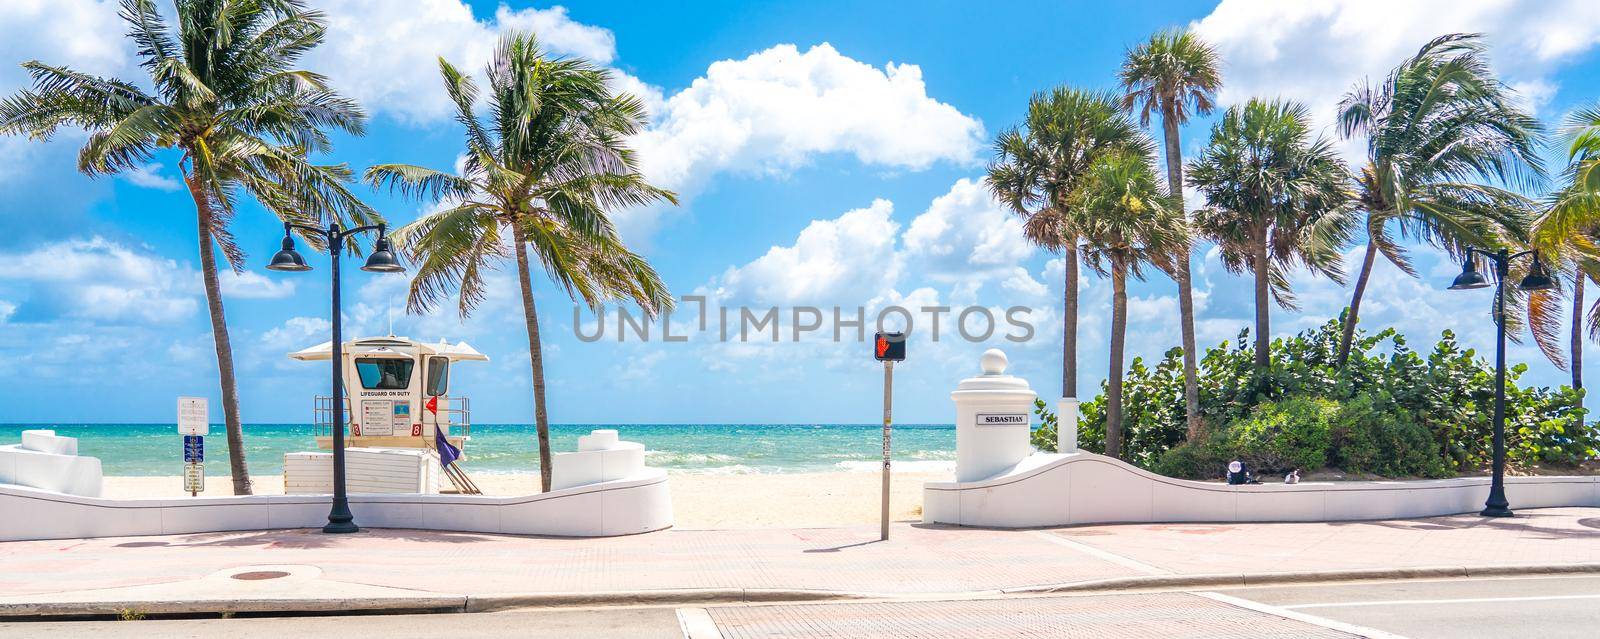 Seafront with lifeguard hut in Fort Lauderdale Florida, USA by Mariakray